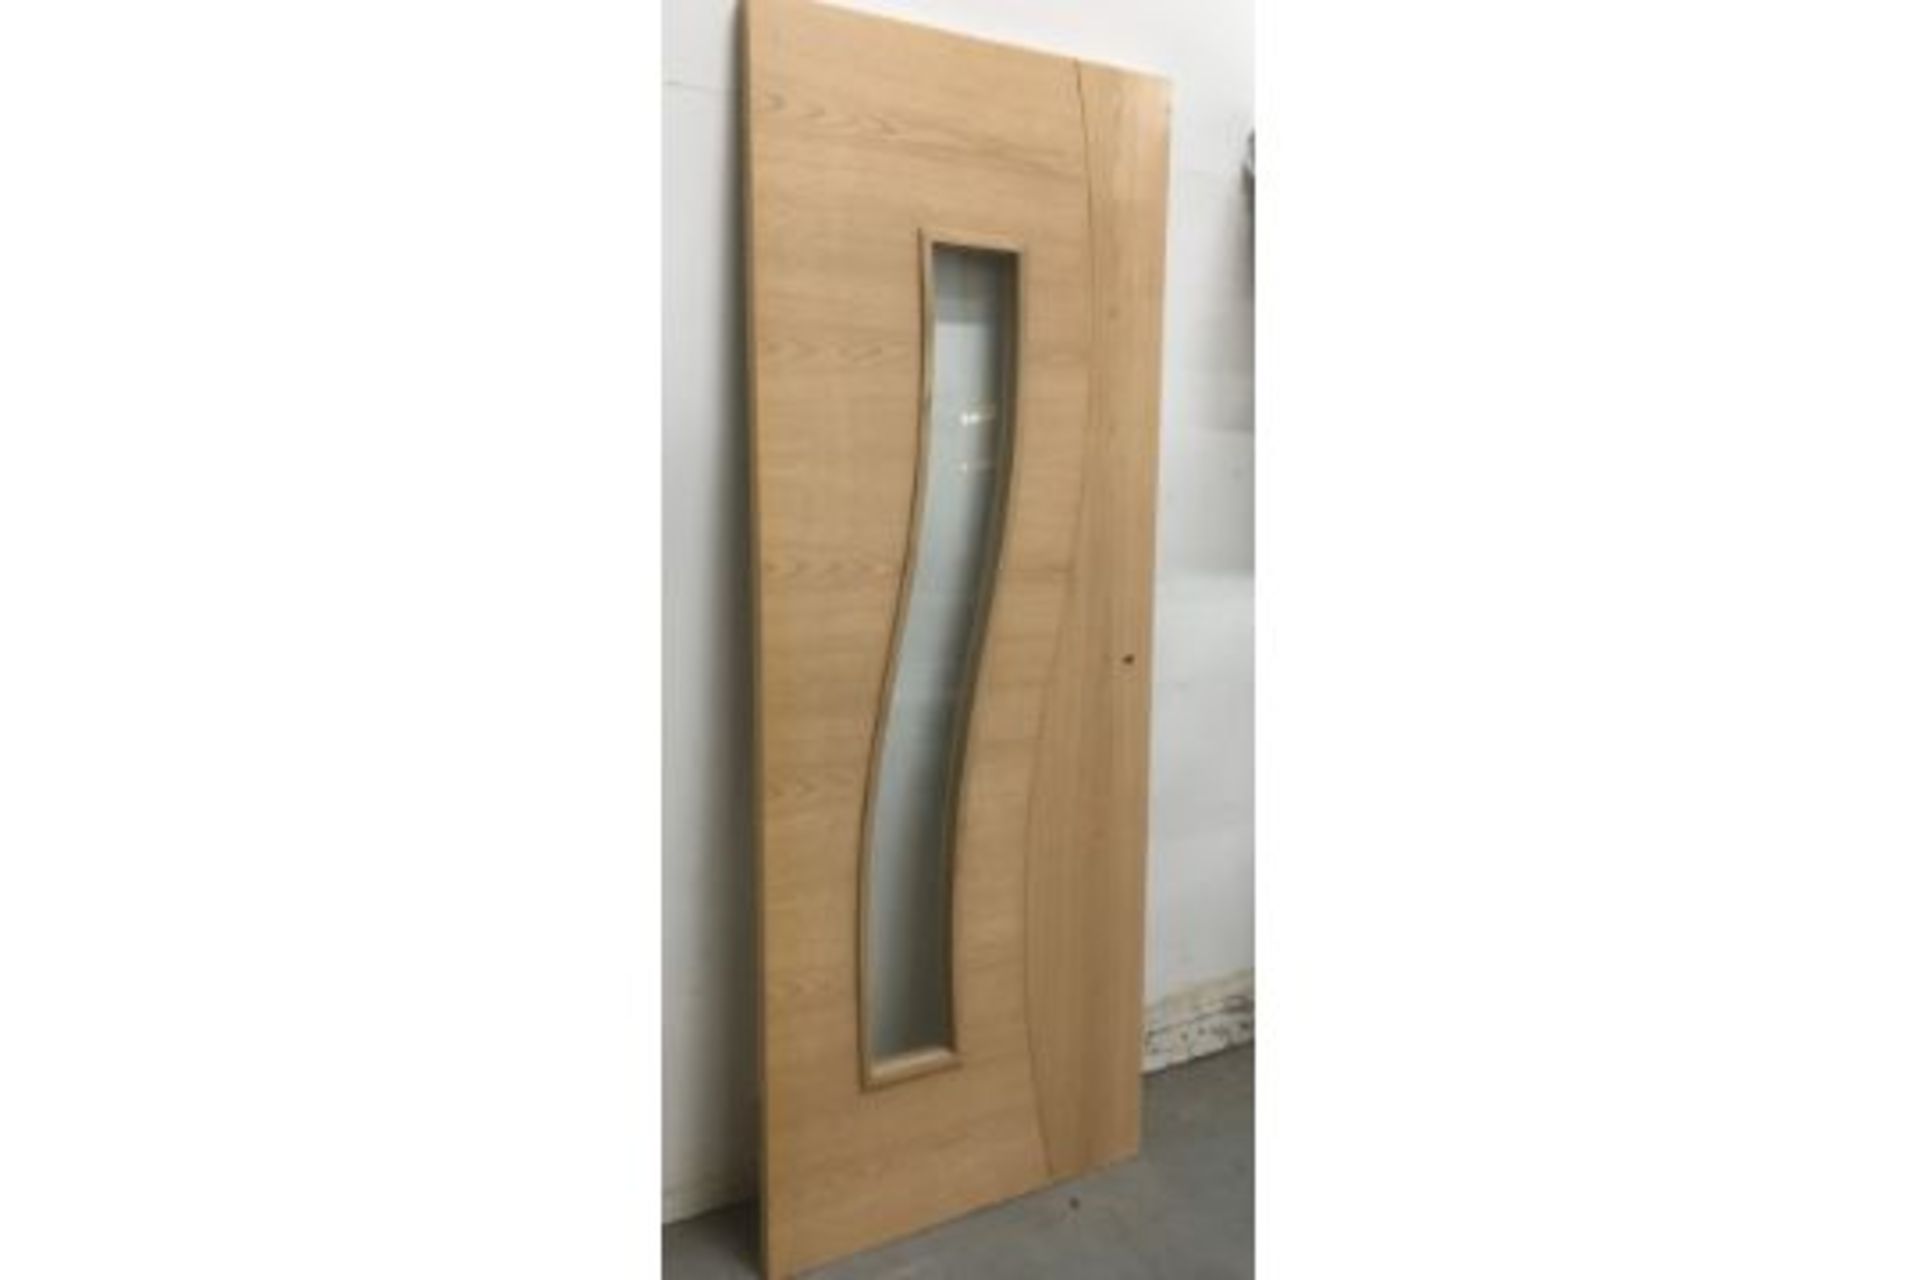 Unlabelled Clear Glazed Interior Door W/ Pre-Cut Hinge & Handle Profiles |1964mm x 758mm x 35mm - Image 2 of 4